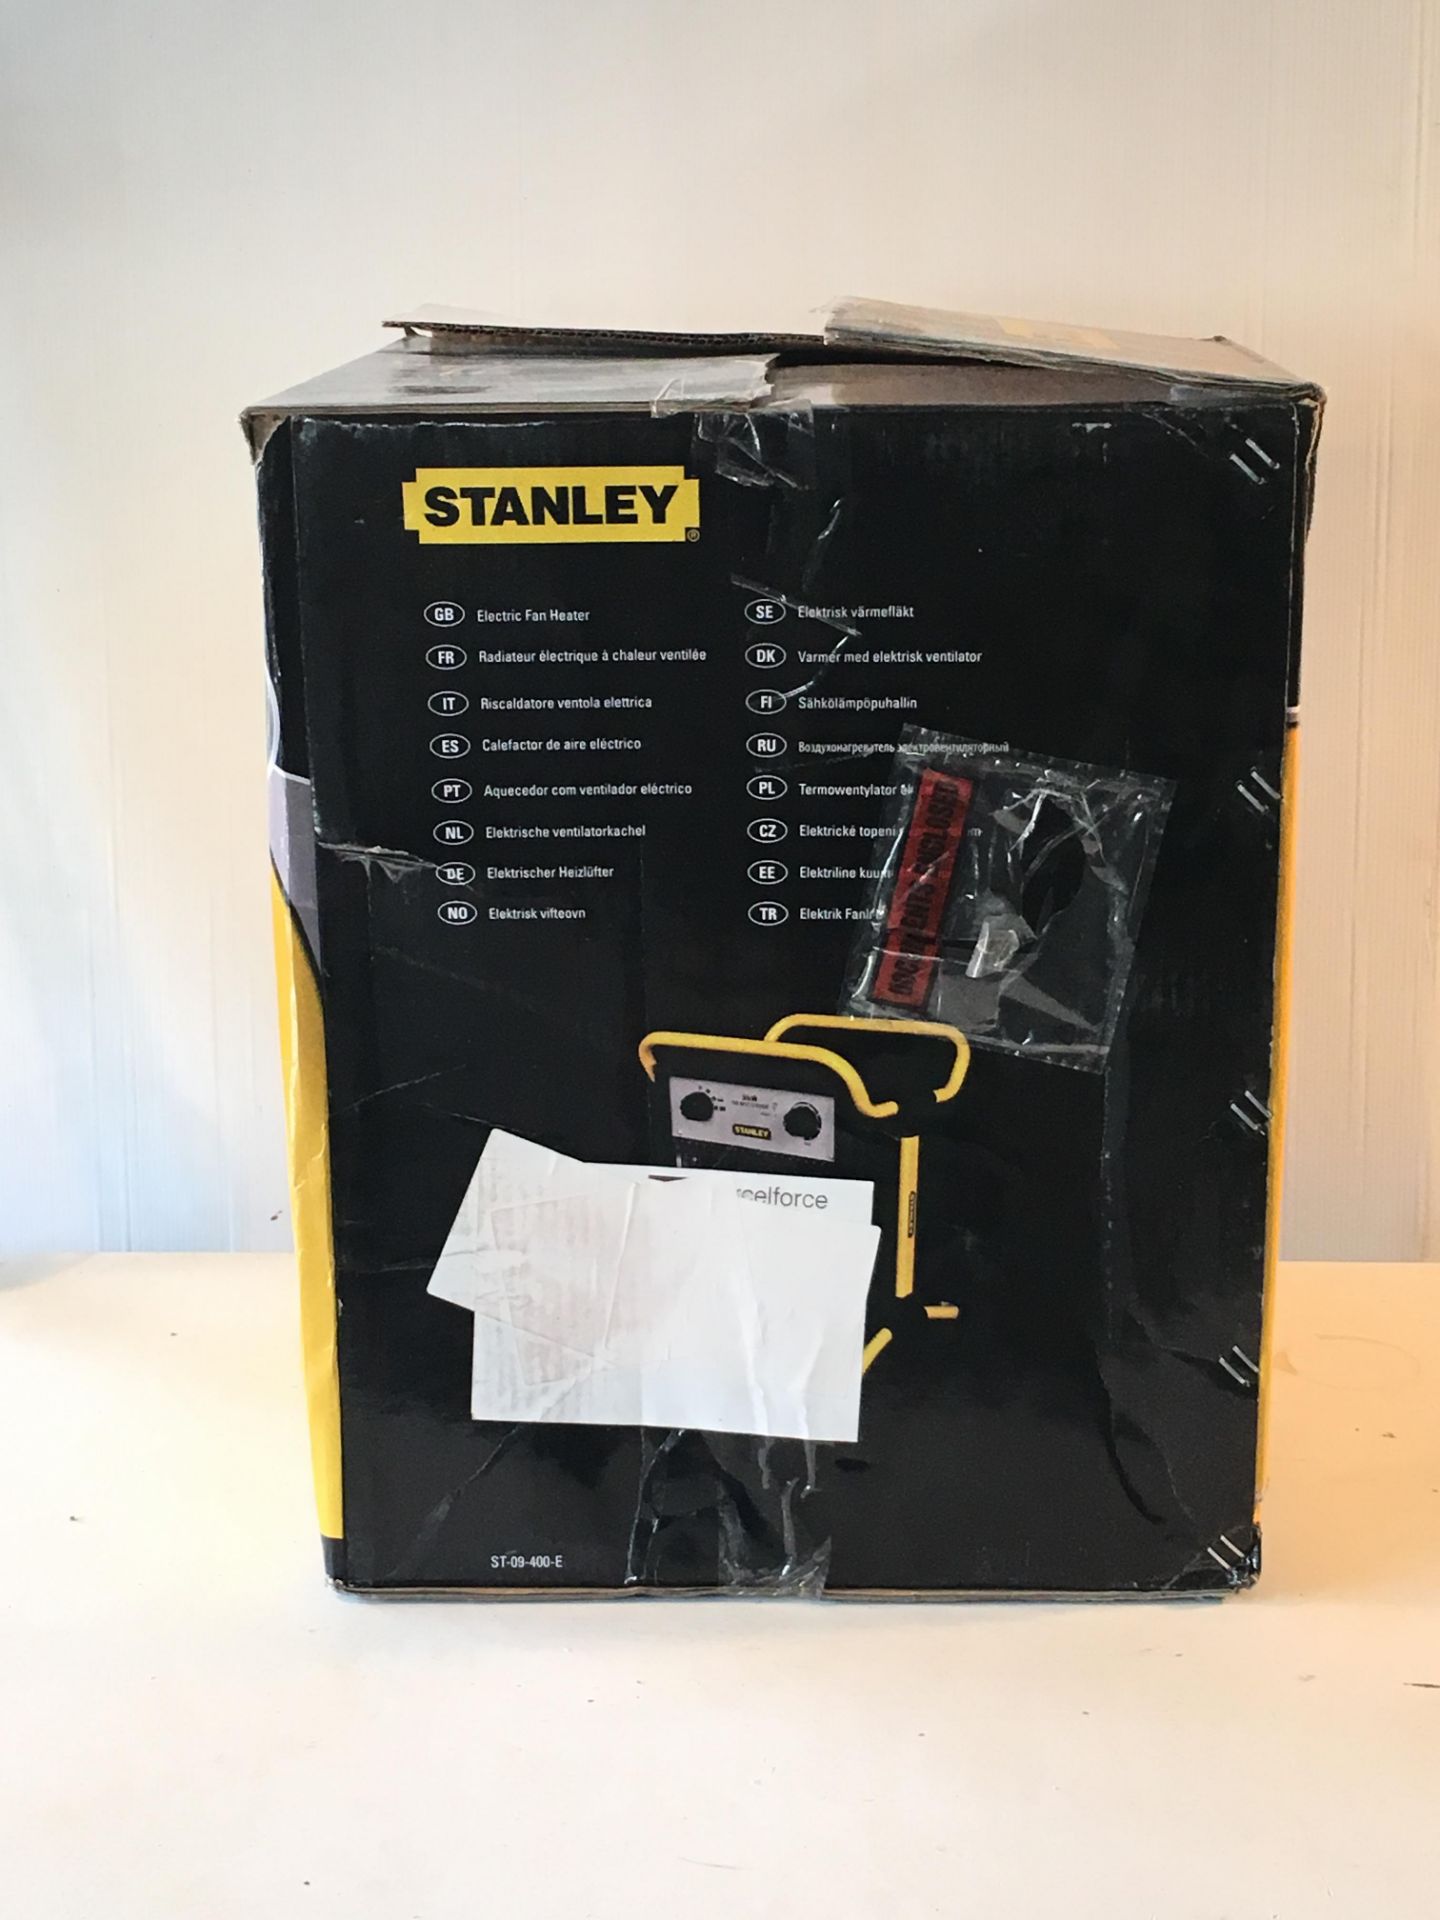 Damaged Box Stanley ST-09-400-E 55/4500/9000W 3 Phase Electric Fan Heater - Image 4 of 8